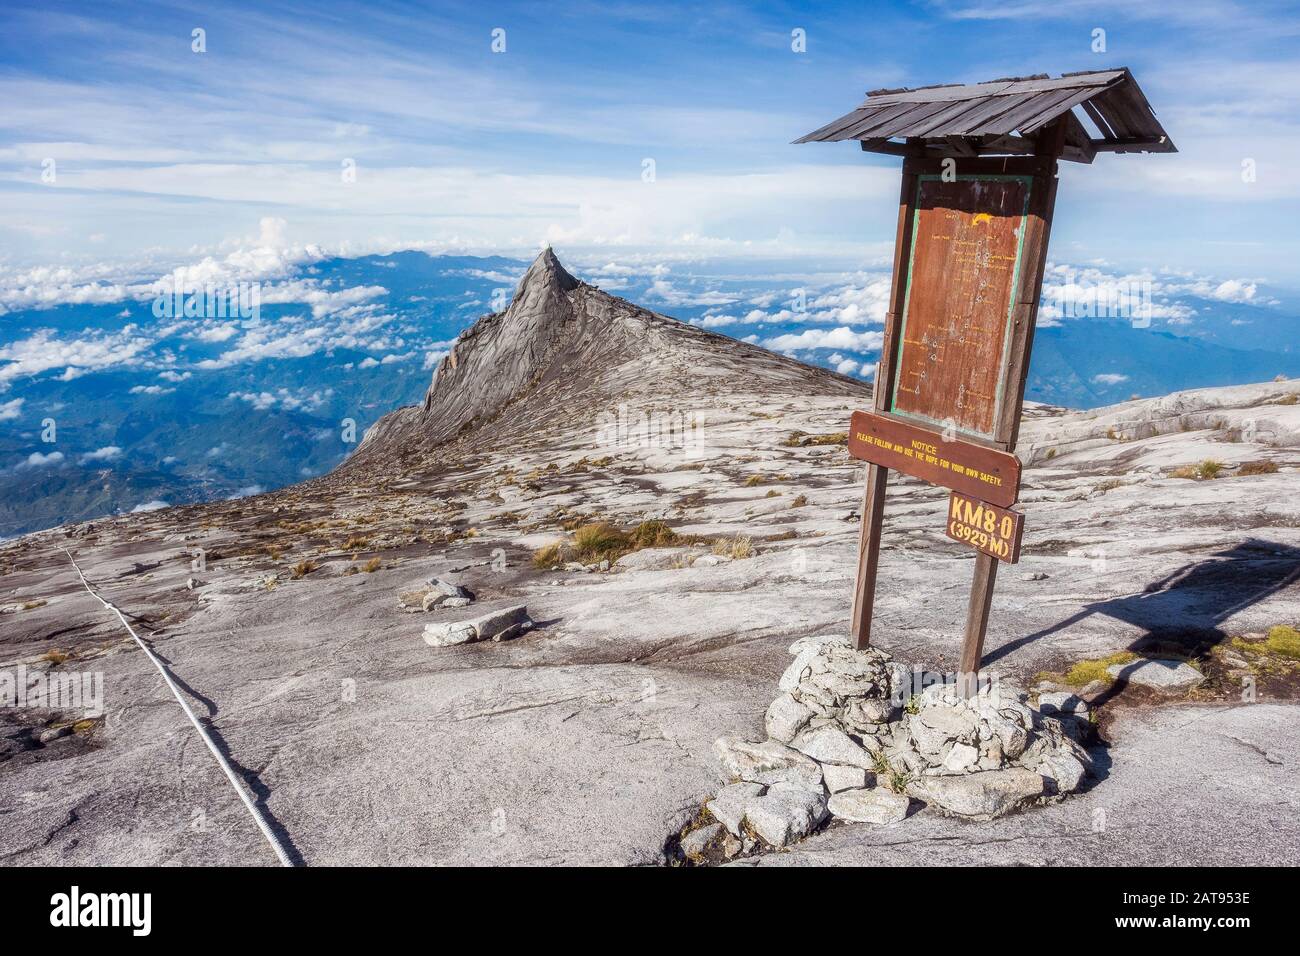 Checkpoint at the top of Mount Kinabalu in Sabah, Borneo, East Malaysia. Stock Photo